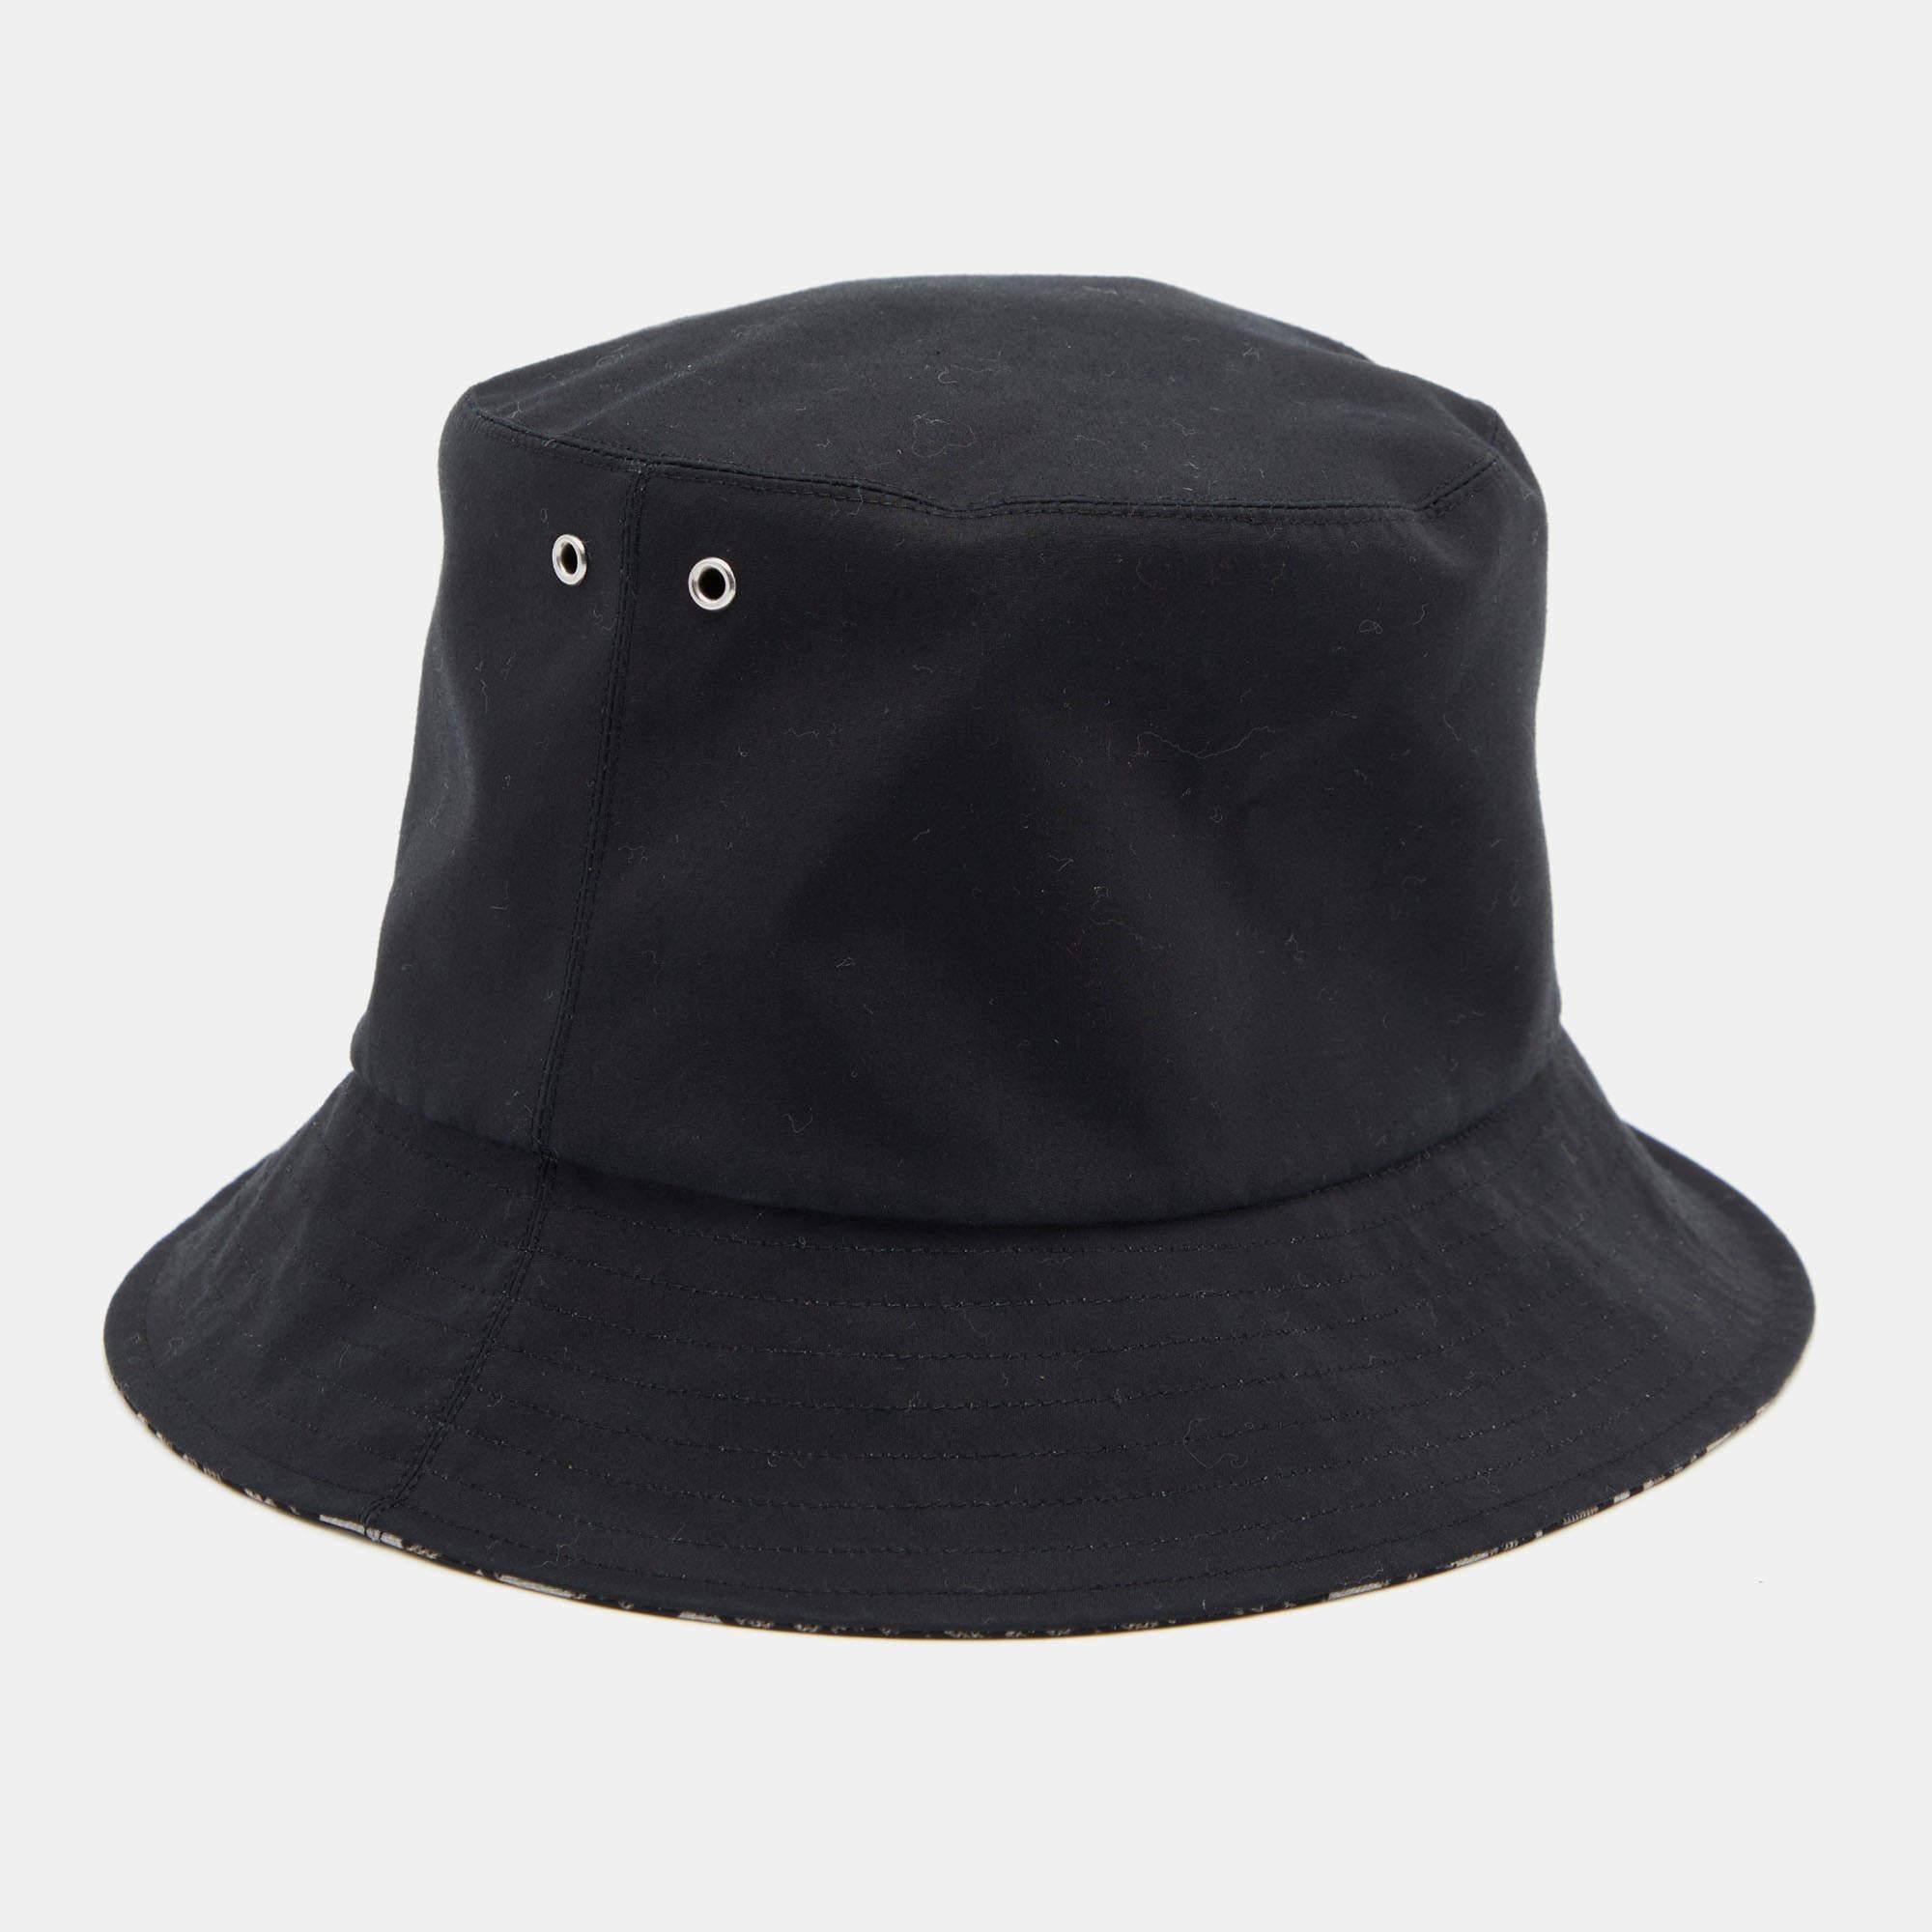 The Christian Dior bucket hat is a fashion accessory that will fit well in your casual wardrobe. Crafted from quality materials in a reversible style, the hat carries a solid black side and the other one is in Oblique canvas.

Includes: Original